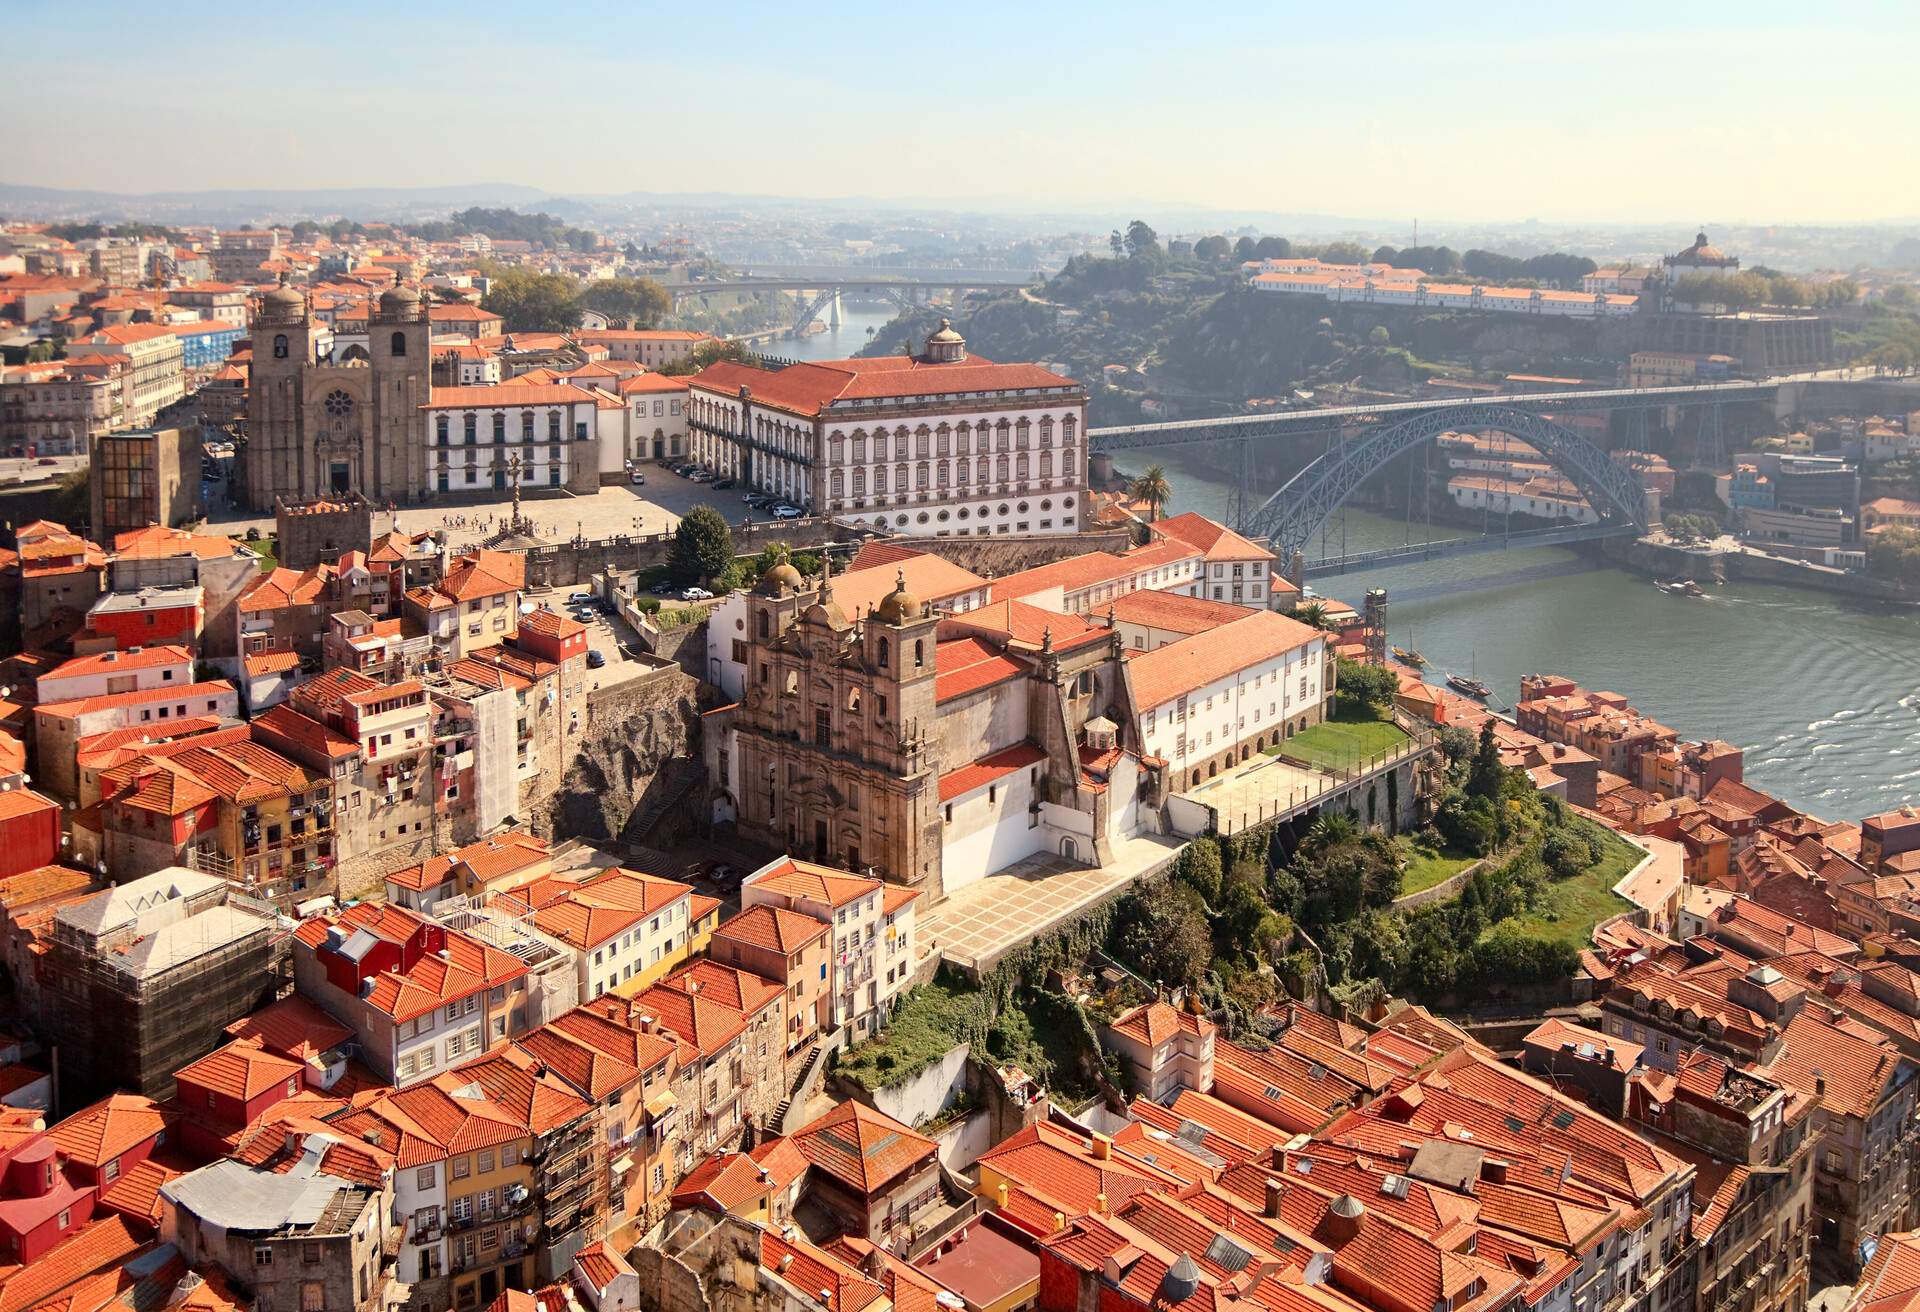 dest_portugal_porto_old-town_gettyimages-517614339_universal_within-usage-period_71797.jpg